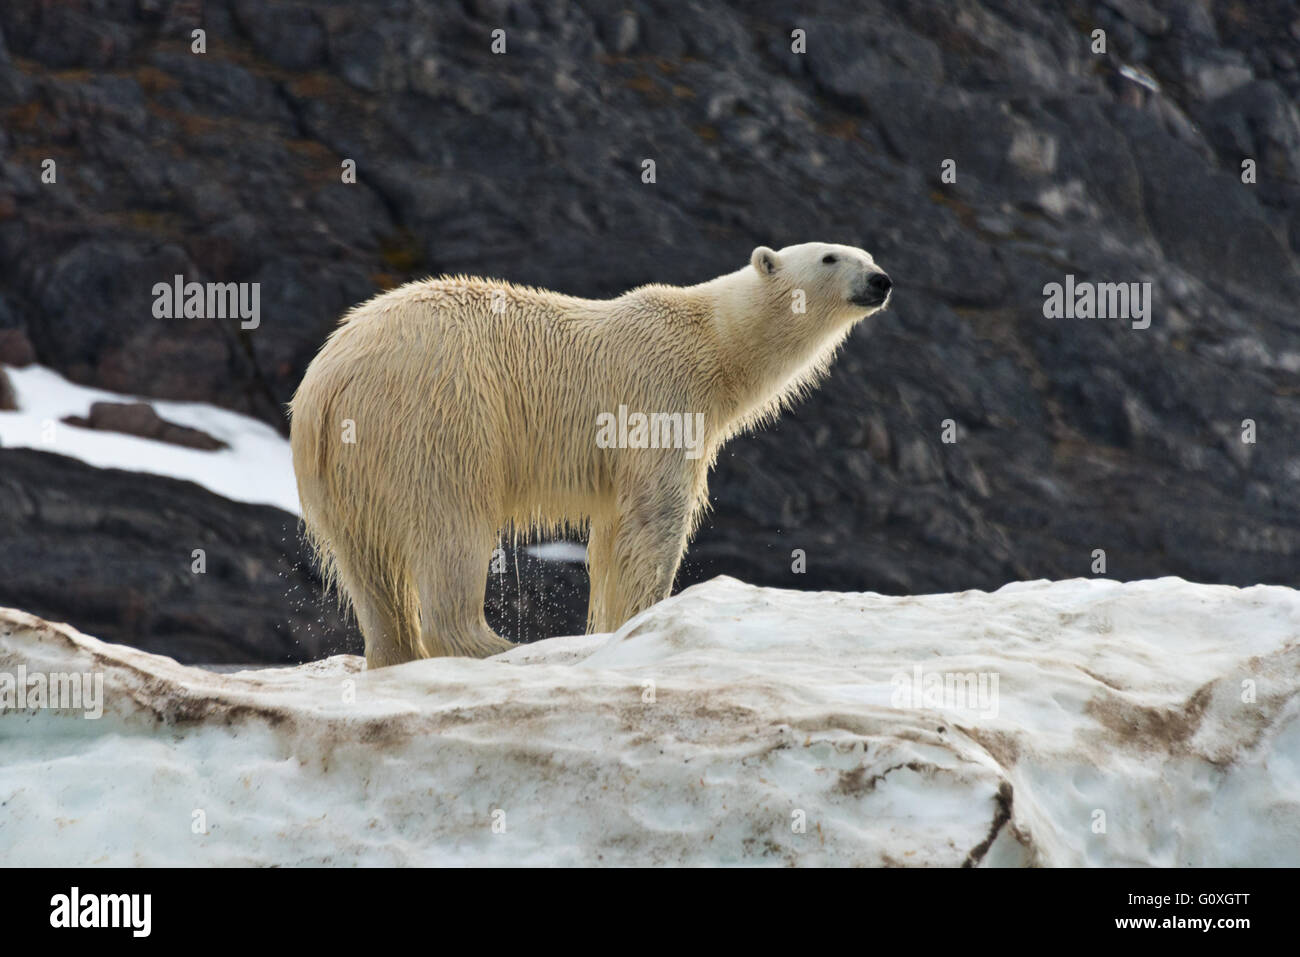 One polar bear standing on a bank of snow dripping with water at the waters edge at Chermsideoya on Nordaustlandet, Svalbard Stock Photo